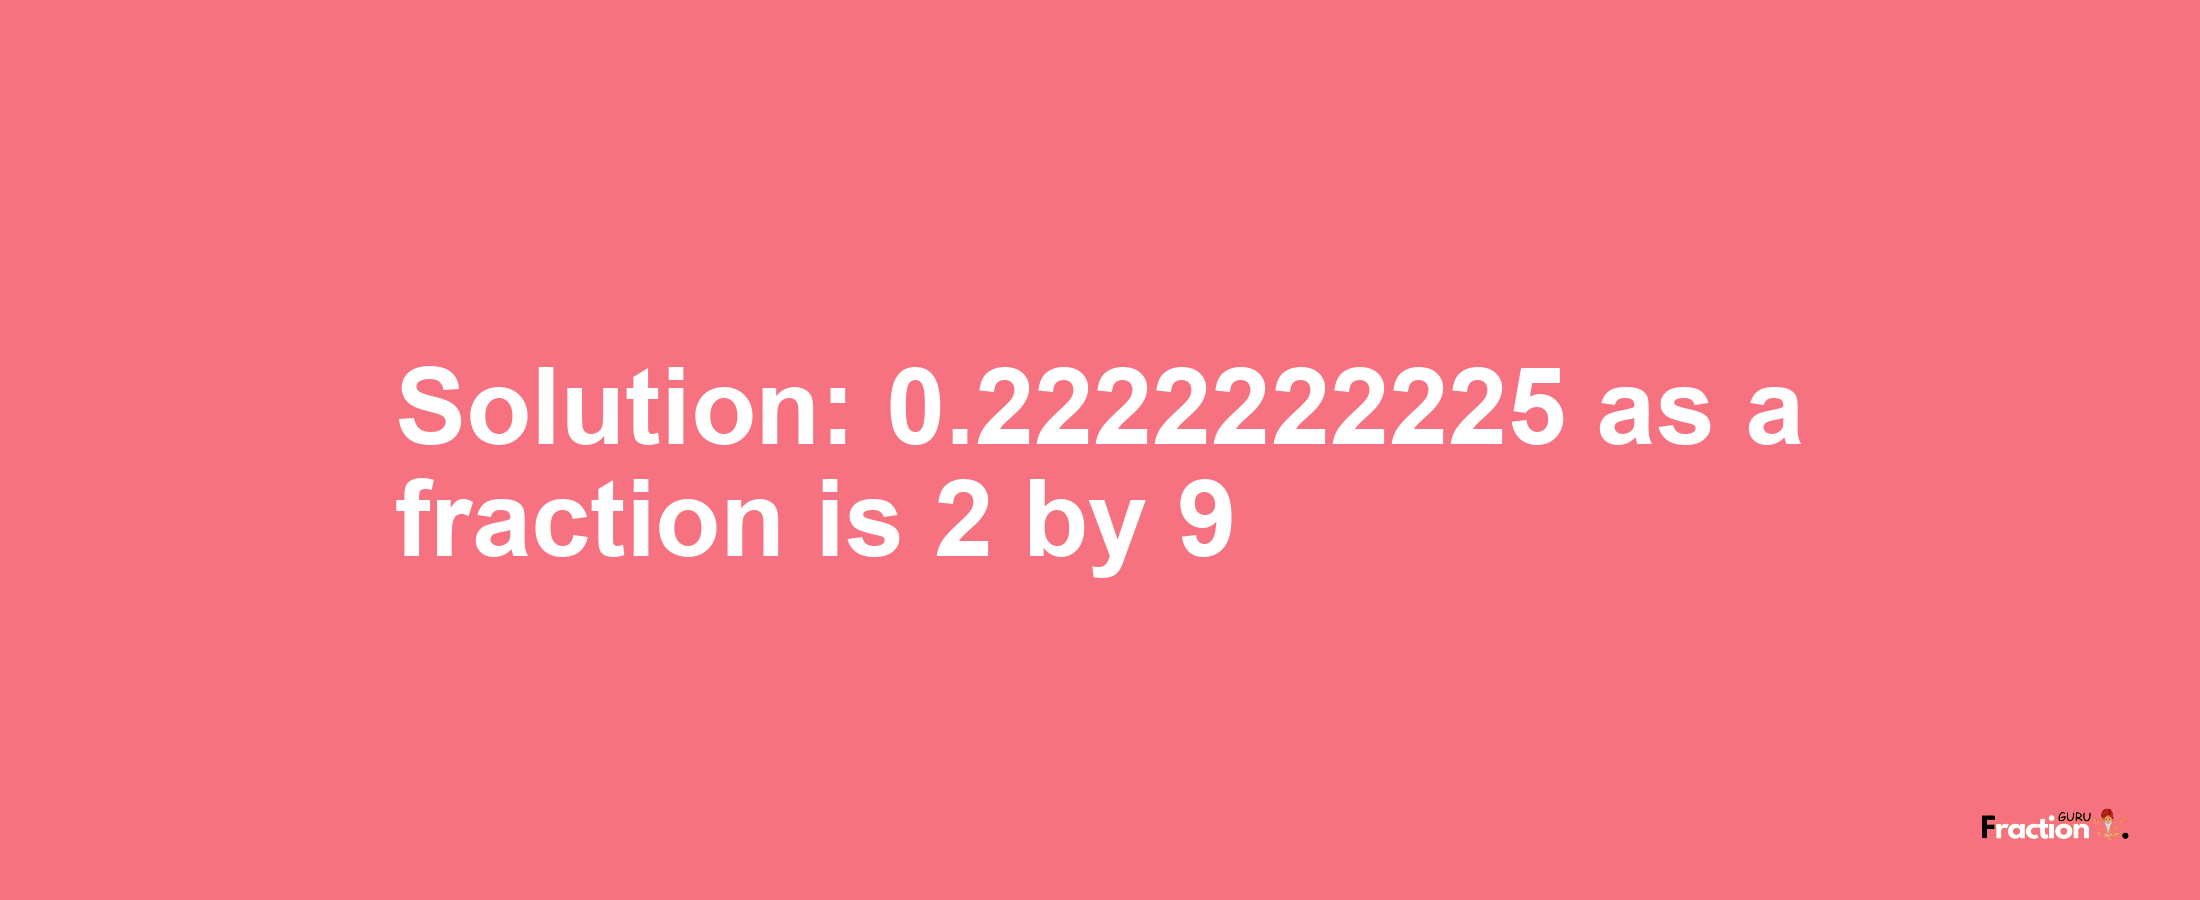 Solution:0.2222222225 as a fraction is 2/9